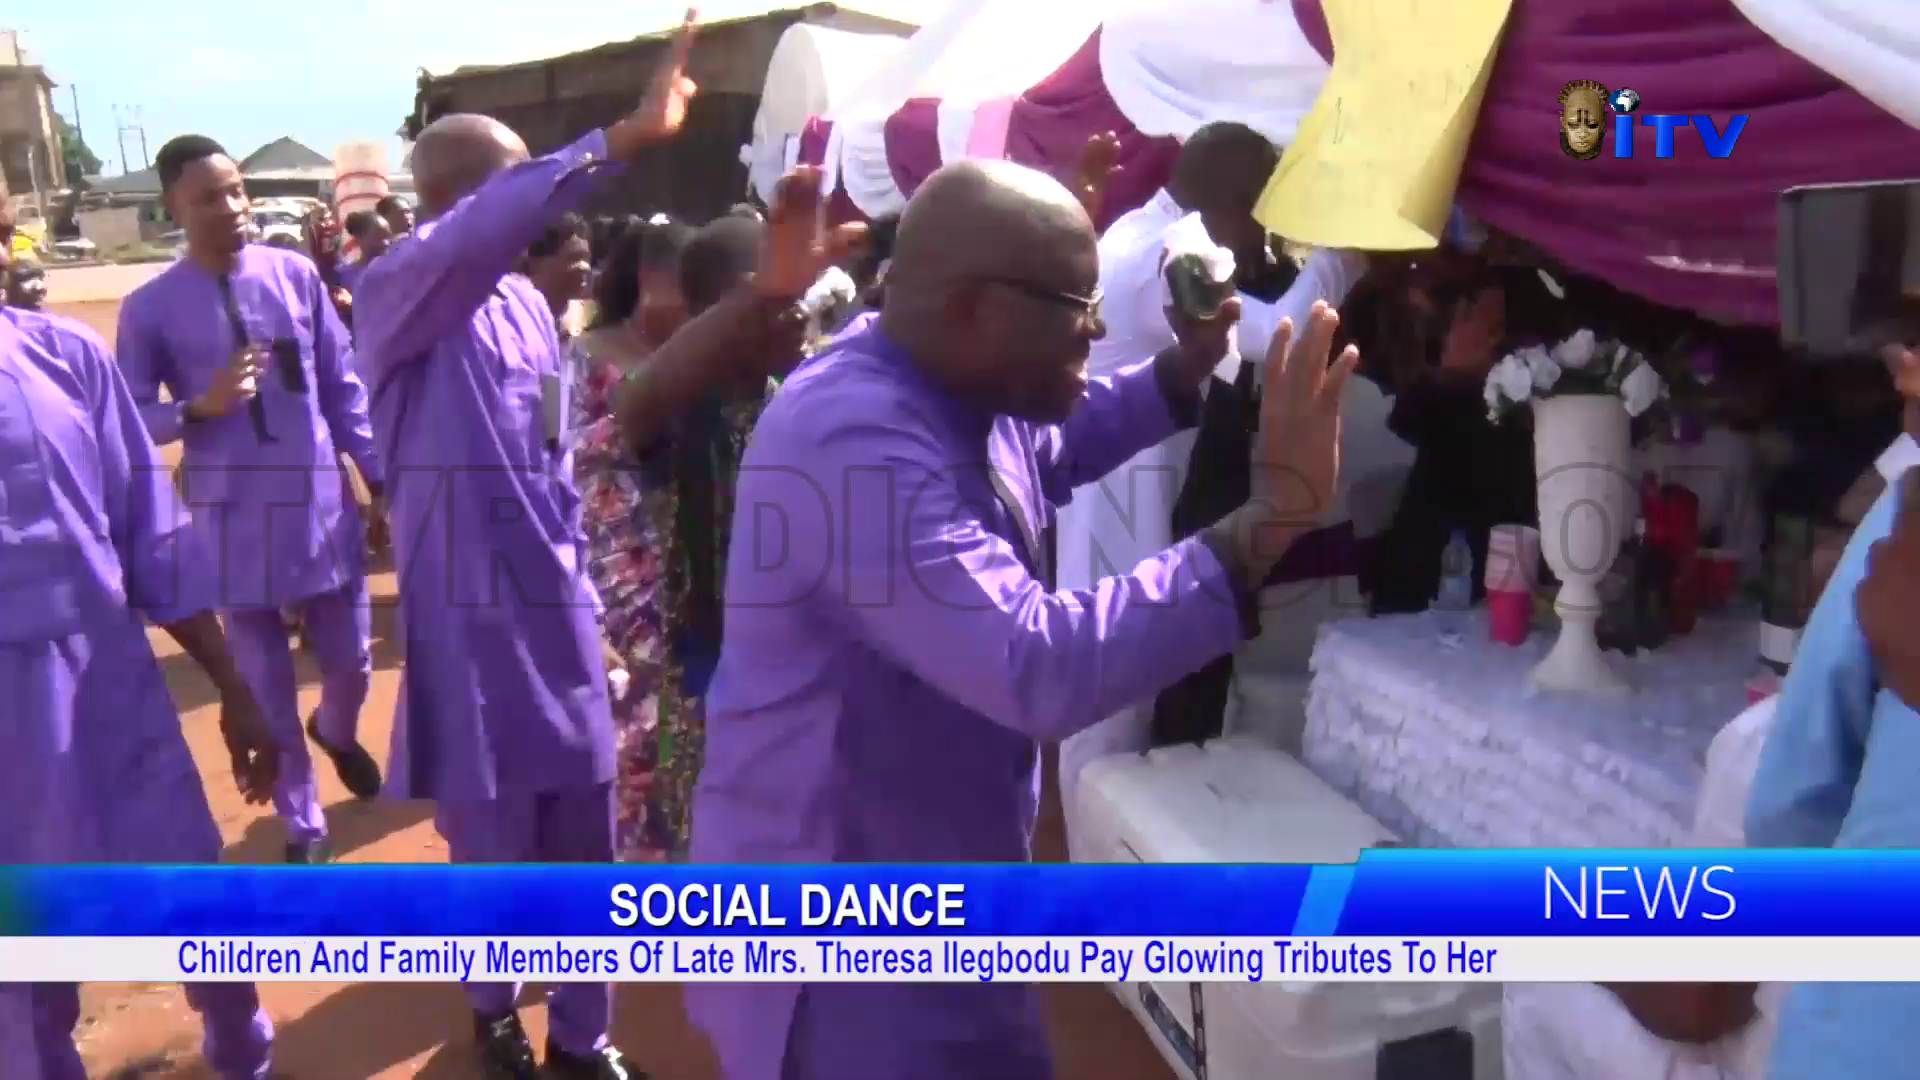 Social Dance: Children And Family Members Of Late Mrs. Theresa Ilegbodu Pay Glowing Tributes To Her